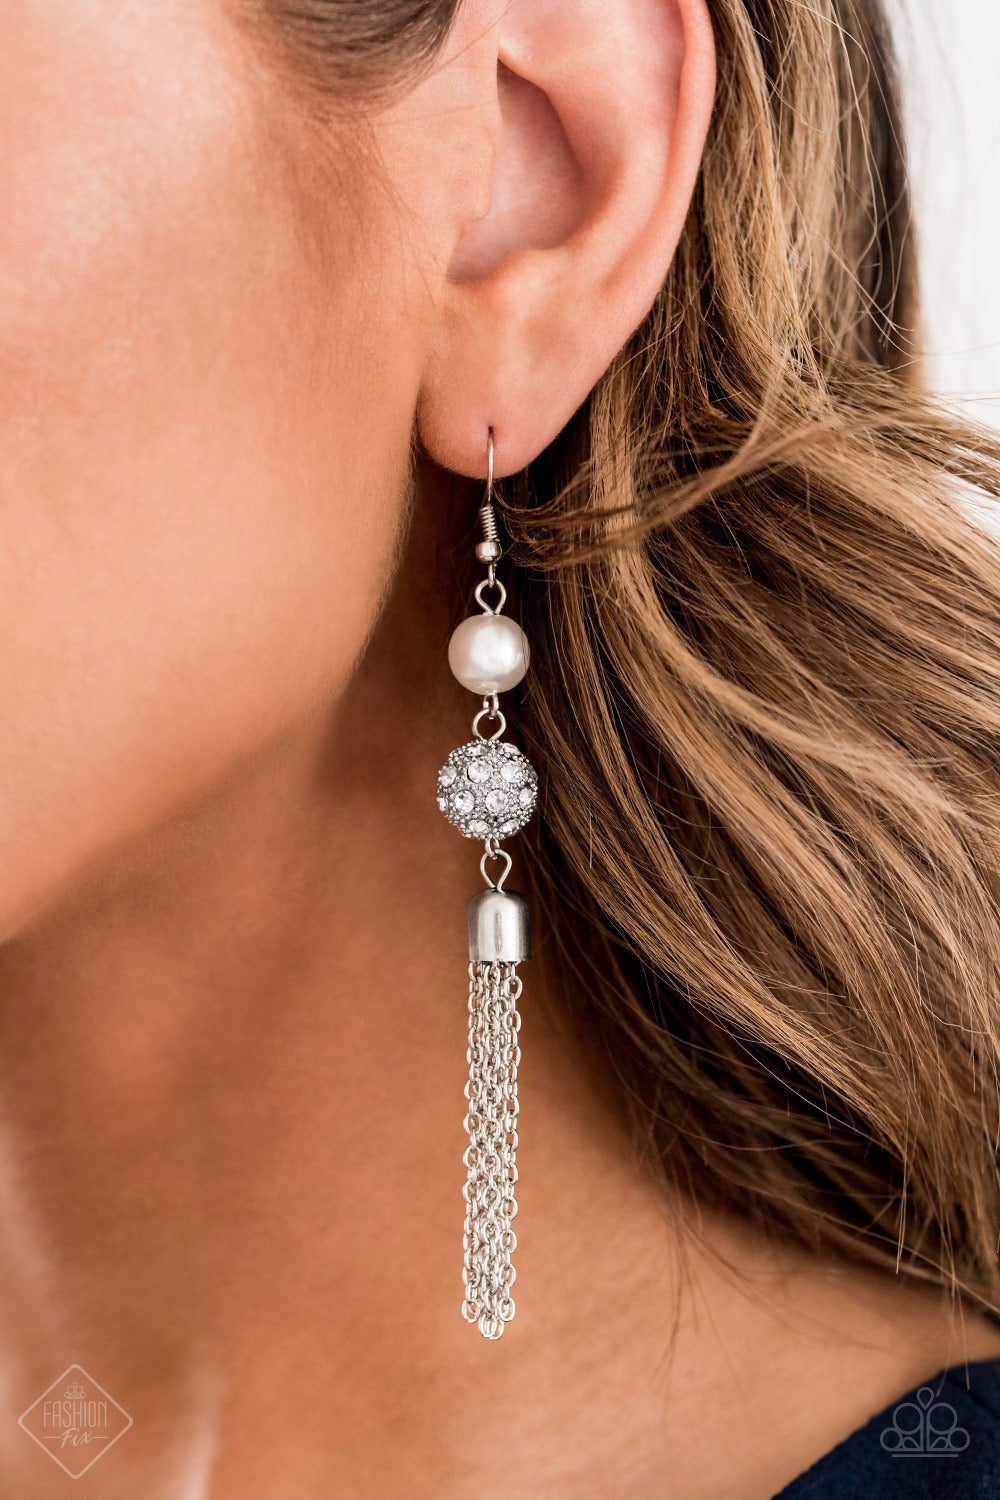 Going DIOR to DIOR - White Earring 1023e